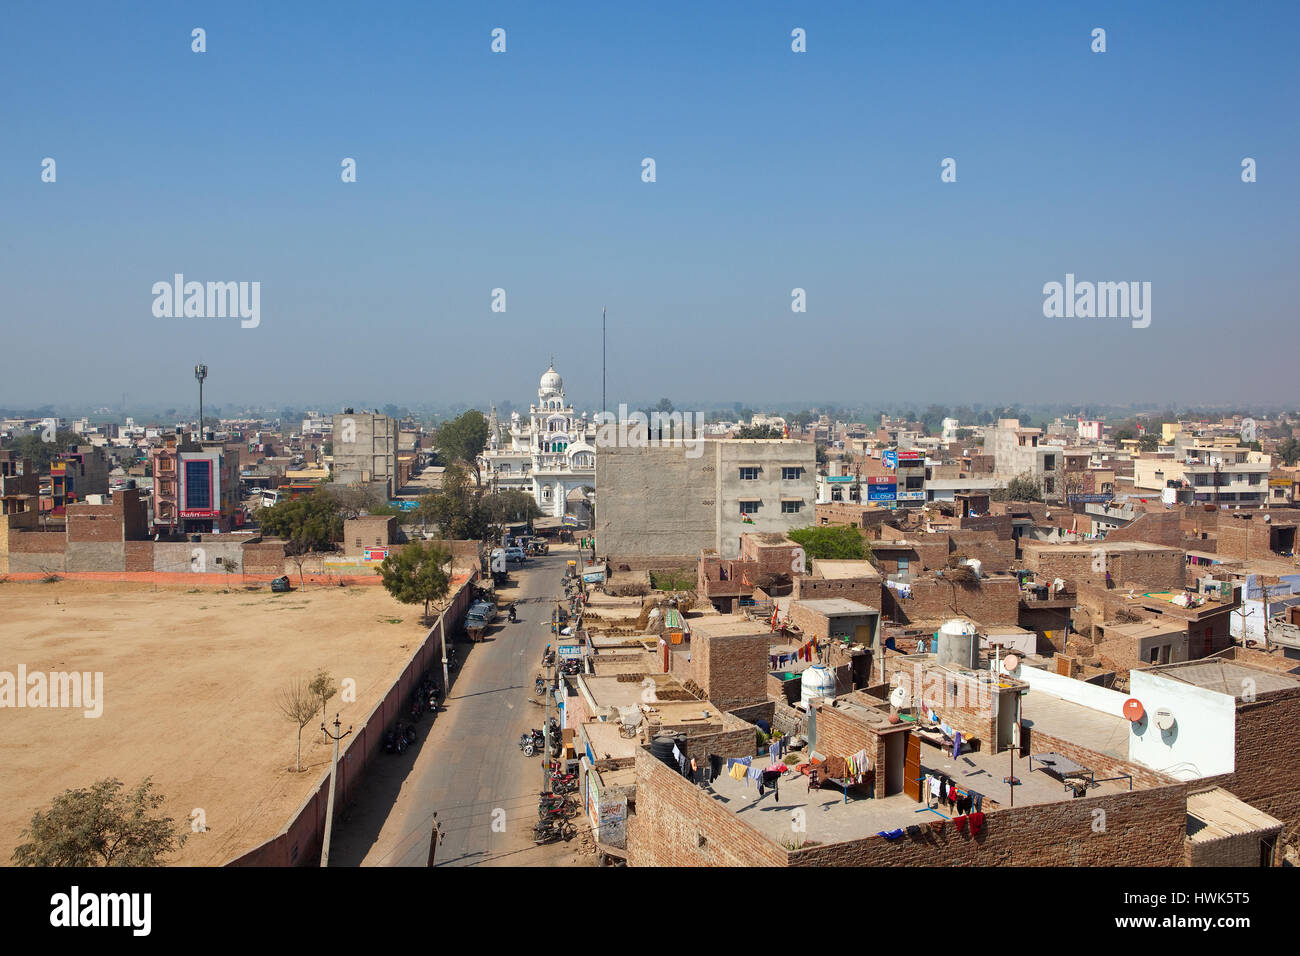 Aerial view of hanumangarh town with white gurdwara and buildings under a blue sky in rajasthan india Stock Photo